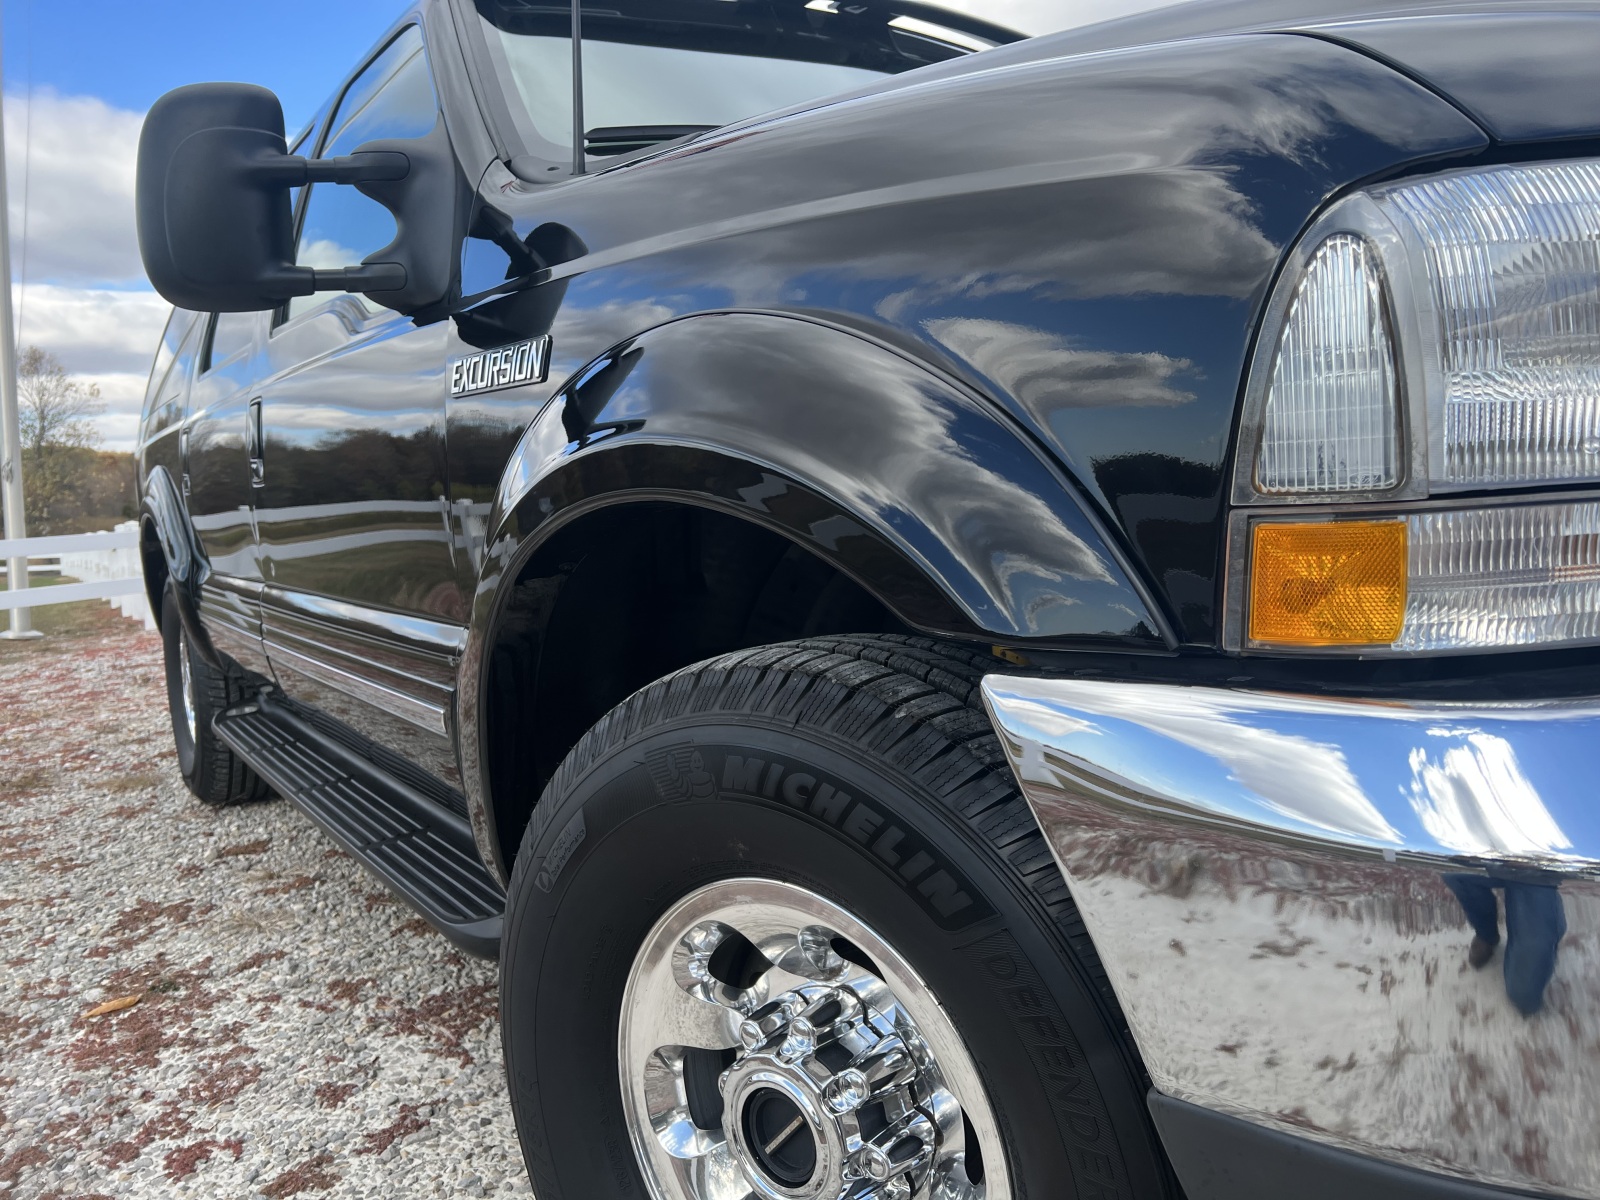 For Sale: 2001 Ford Excursion 4x4 7.3L 128,800miles - photo11